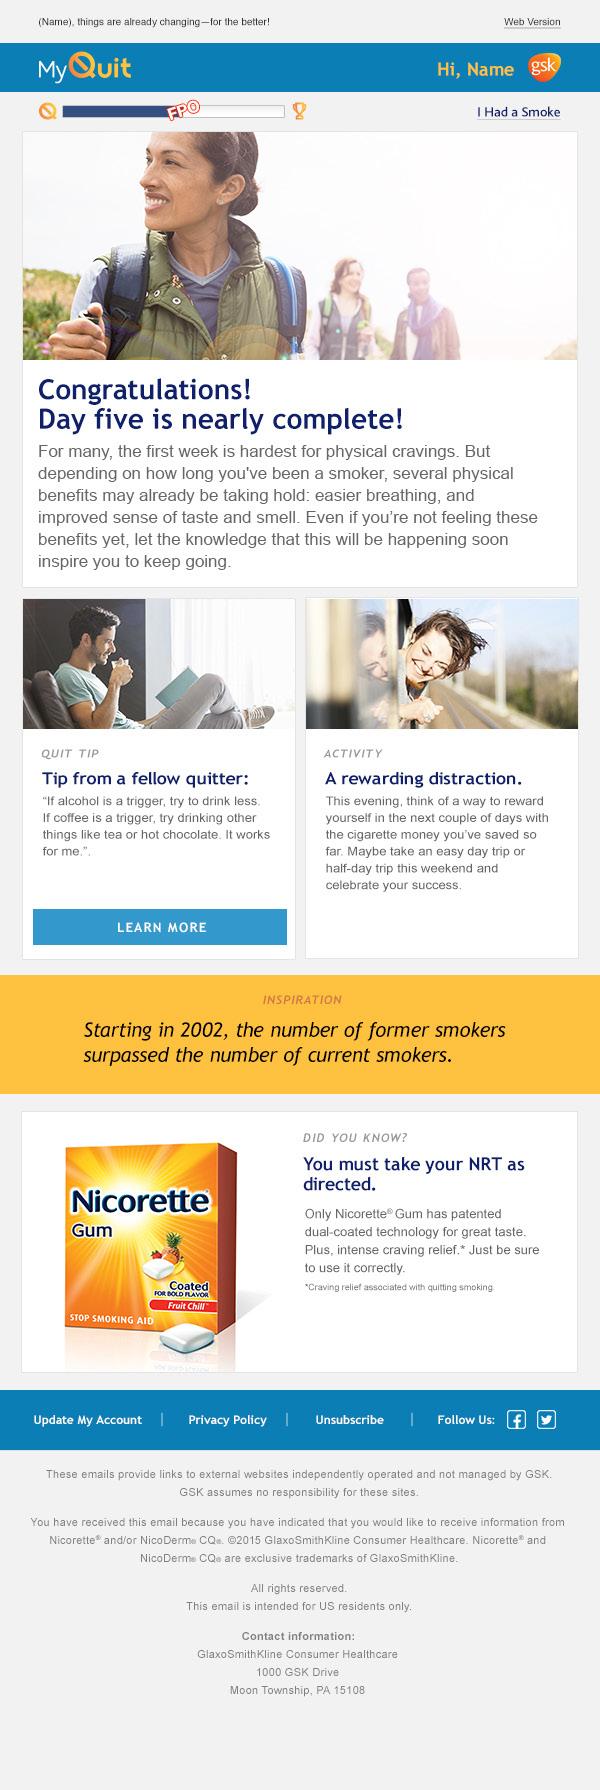 Day 5 PM Subject line: First week benefit to quitting. https://www.quit.com/quitting/cigarette-cravings.html Variable Product Pods You must take your NRT as directed.